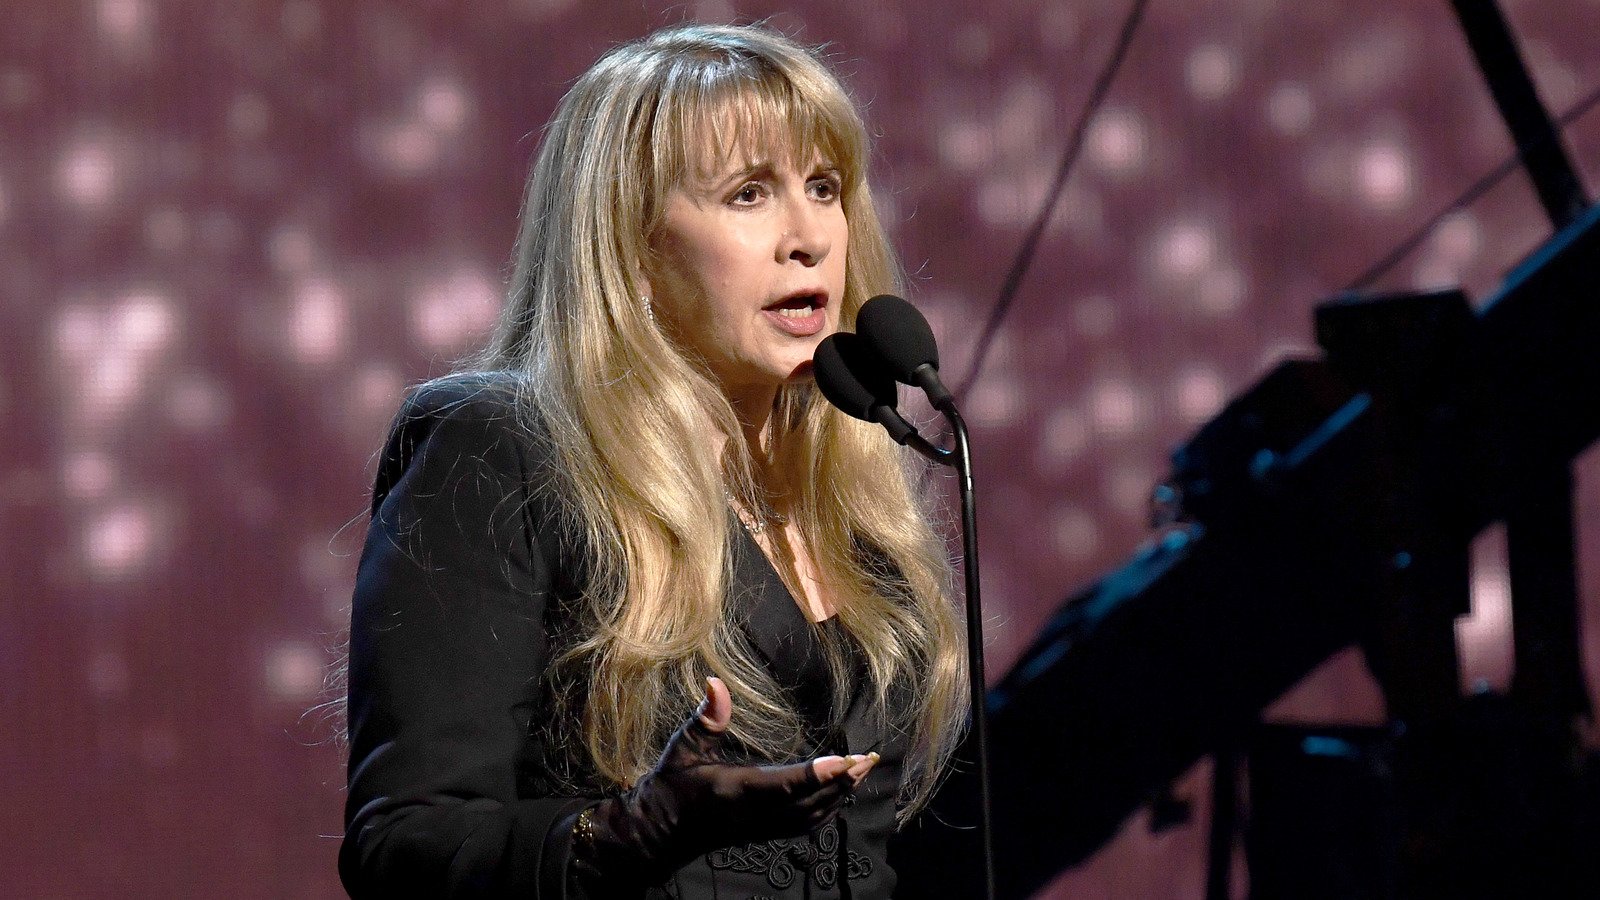 The Truth About Stevie Nicks' Vocal Problems